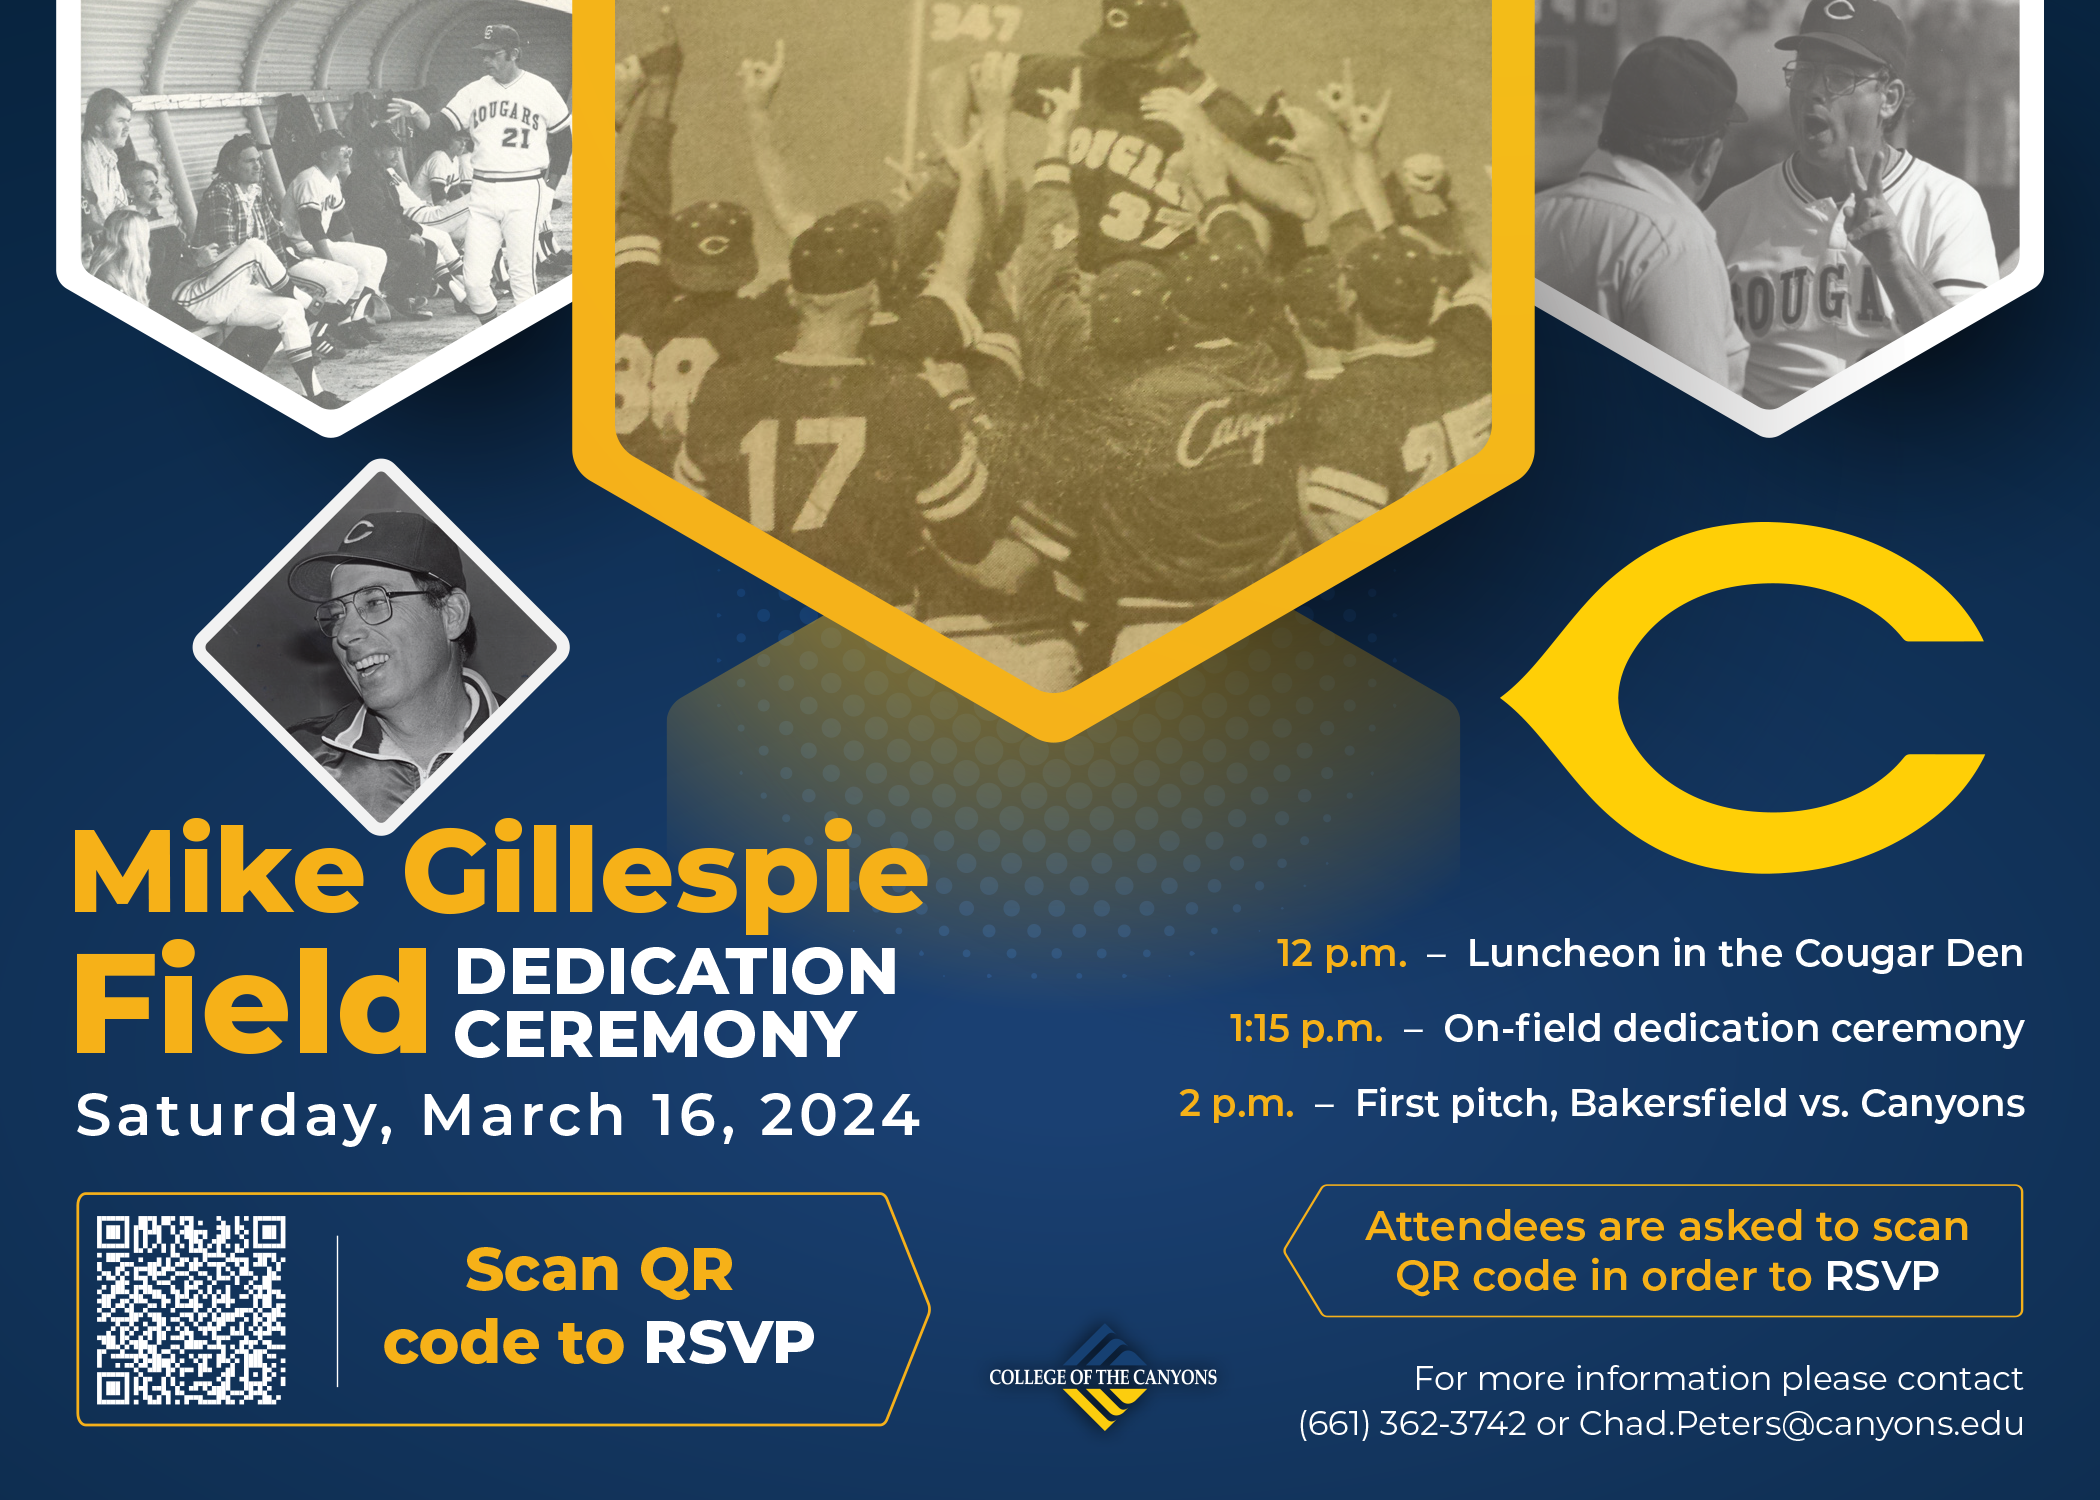 Promotional graphic for Mike Gillespie Field dedication ceremony on Saturday, March 16 featuring historical images of Coach Gillespie and COC logos against a blue background with gold and yellow text detailing event start time and information about how attendees should RSVP.